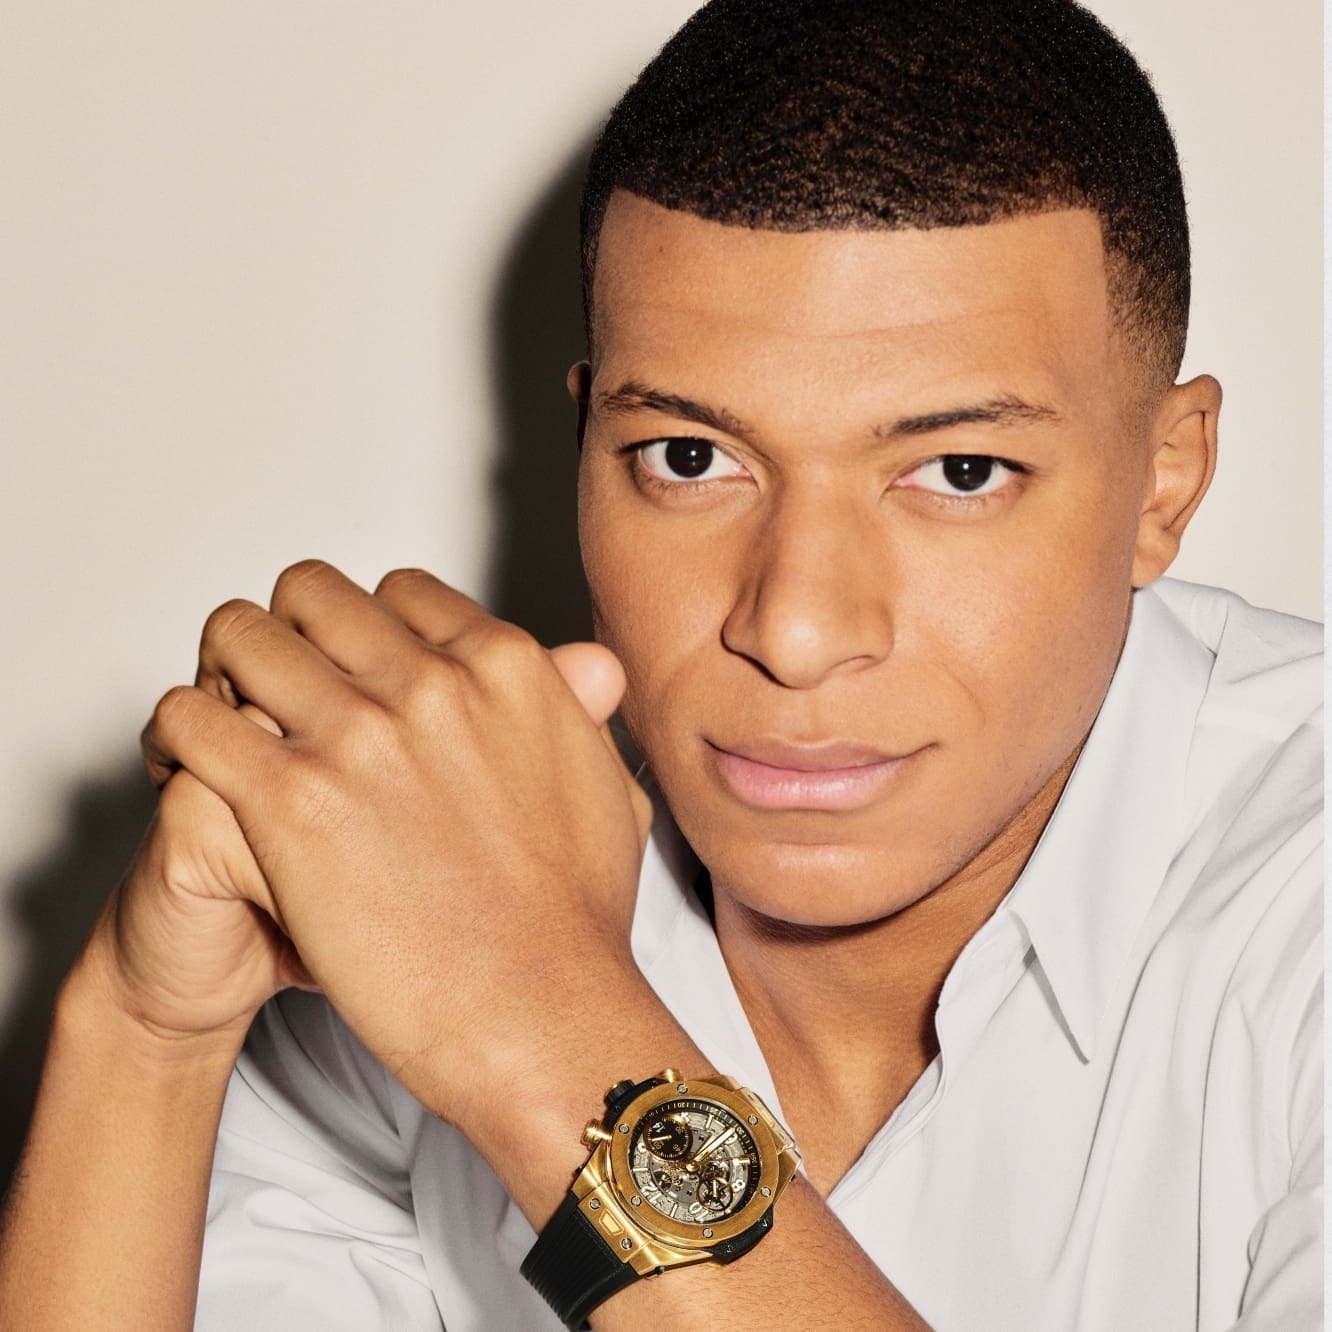 Hublot's signing of Kylian Mbappé reflects the brand's sporting power